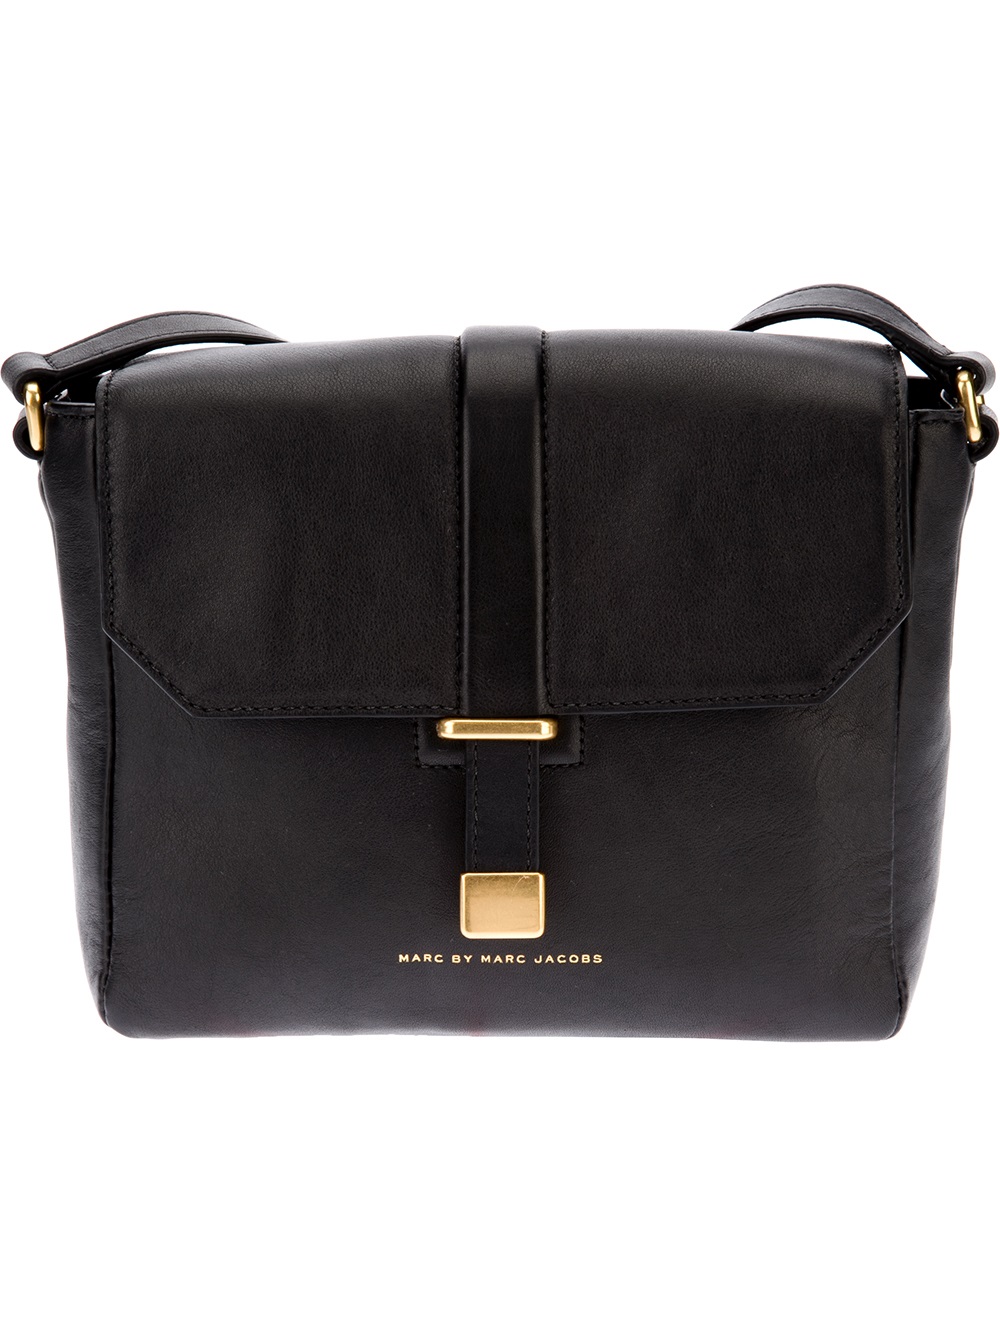 Lyst - Marc By Marc Jacobs Natural Selection Mini Messenger Bag in Black